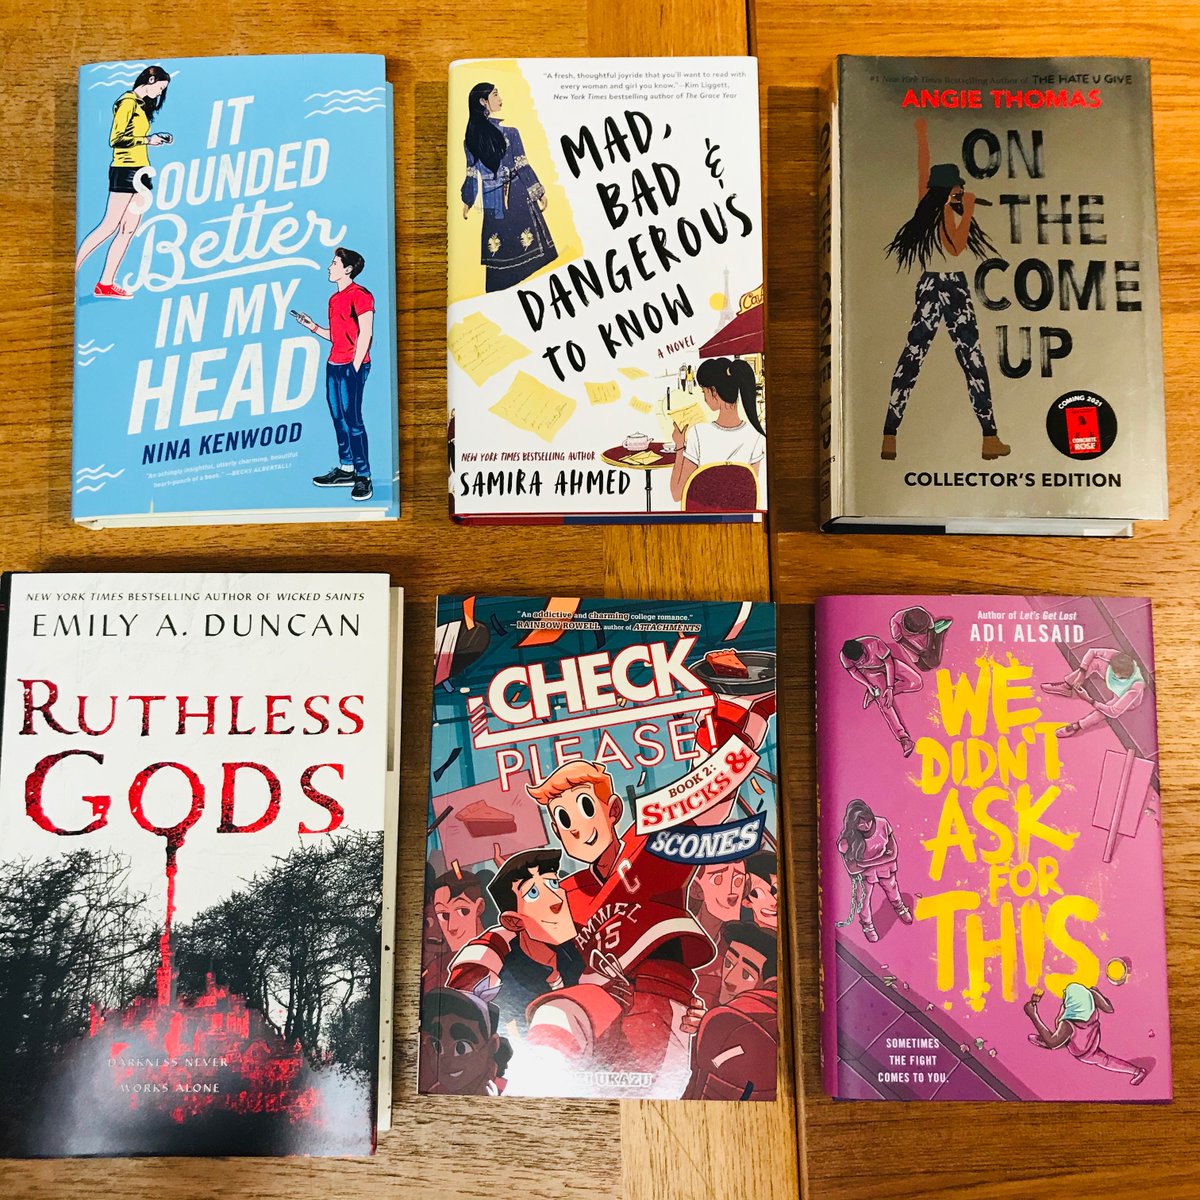 IT SOUNDED BETTER IN MY HEAD by  @NinaKenwood!RUTHLESS GODS by  @glitzandshadows!MAD, BAD, & DANGEROUS TO KNOW by  @sam_aye_ahm!CHECK PLEASE: STICKS & SCONES by  @ngoziu!ON THE COME UP COLLECTOR'S EDITION by  @angiecthomas (it's shiny silver)!WE DIDN'T ASK FOR THIS by  @AdiAlsaid!